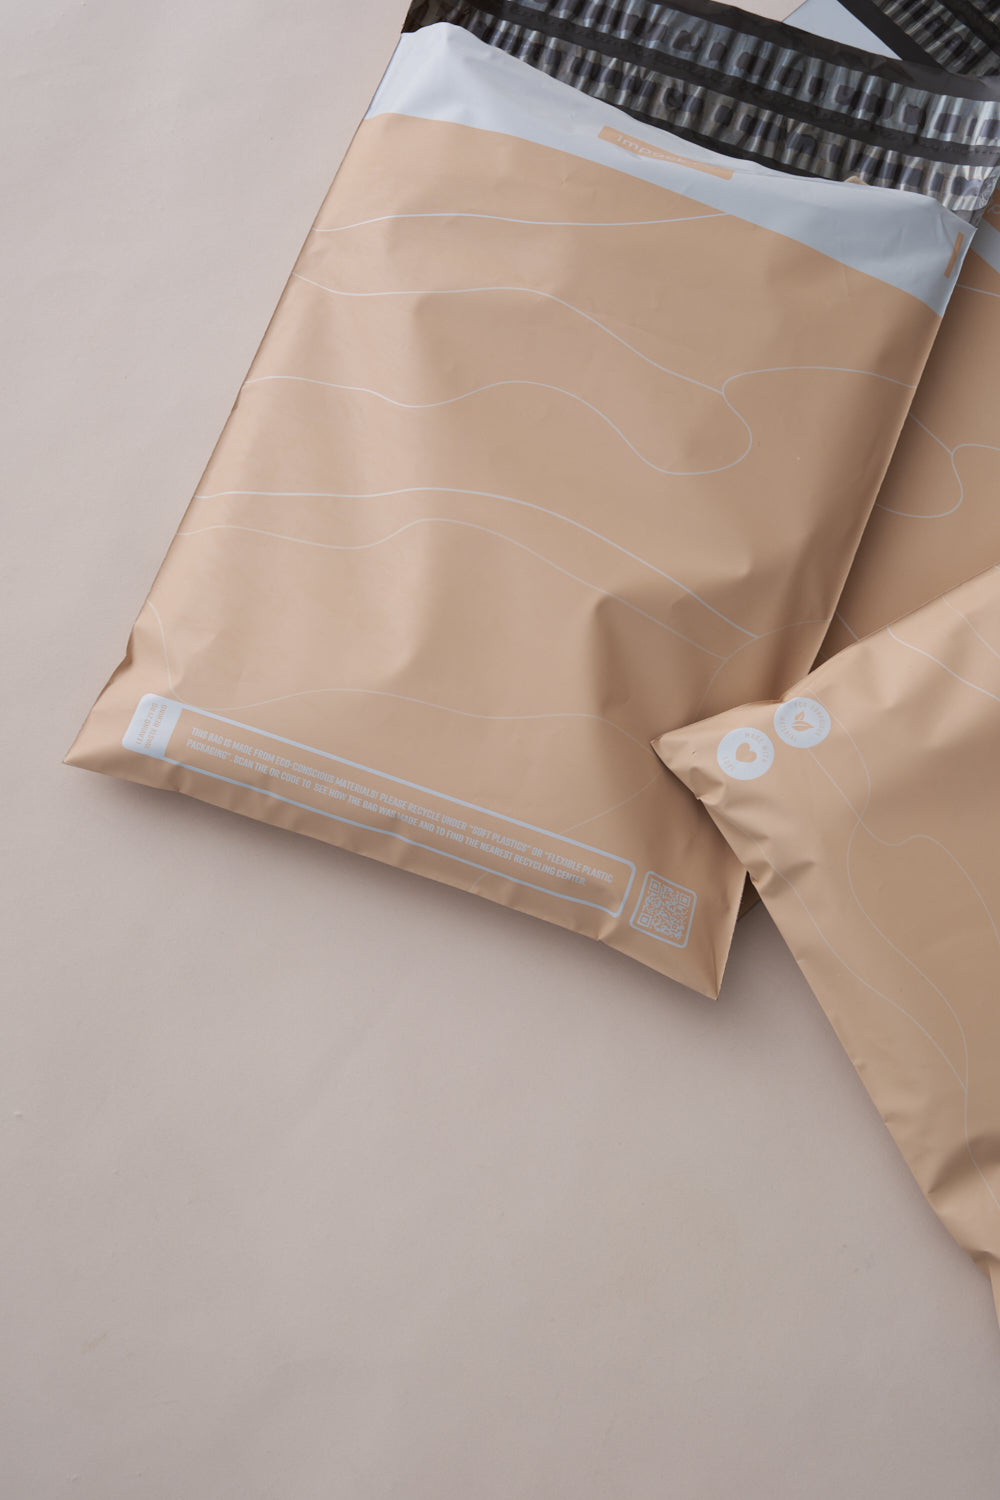 Two tan-colored plastic bags with white patterns and text, placed on a beige surface. One bag, offering versatile packaging solutions, is larger and partially overlaps the smaller one. These are Tidal Sand Mailers 10" x 13" by impack.co.